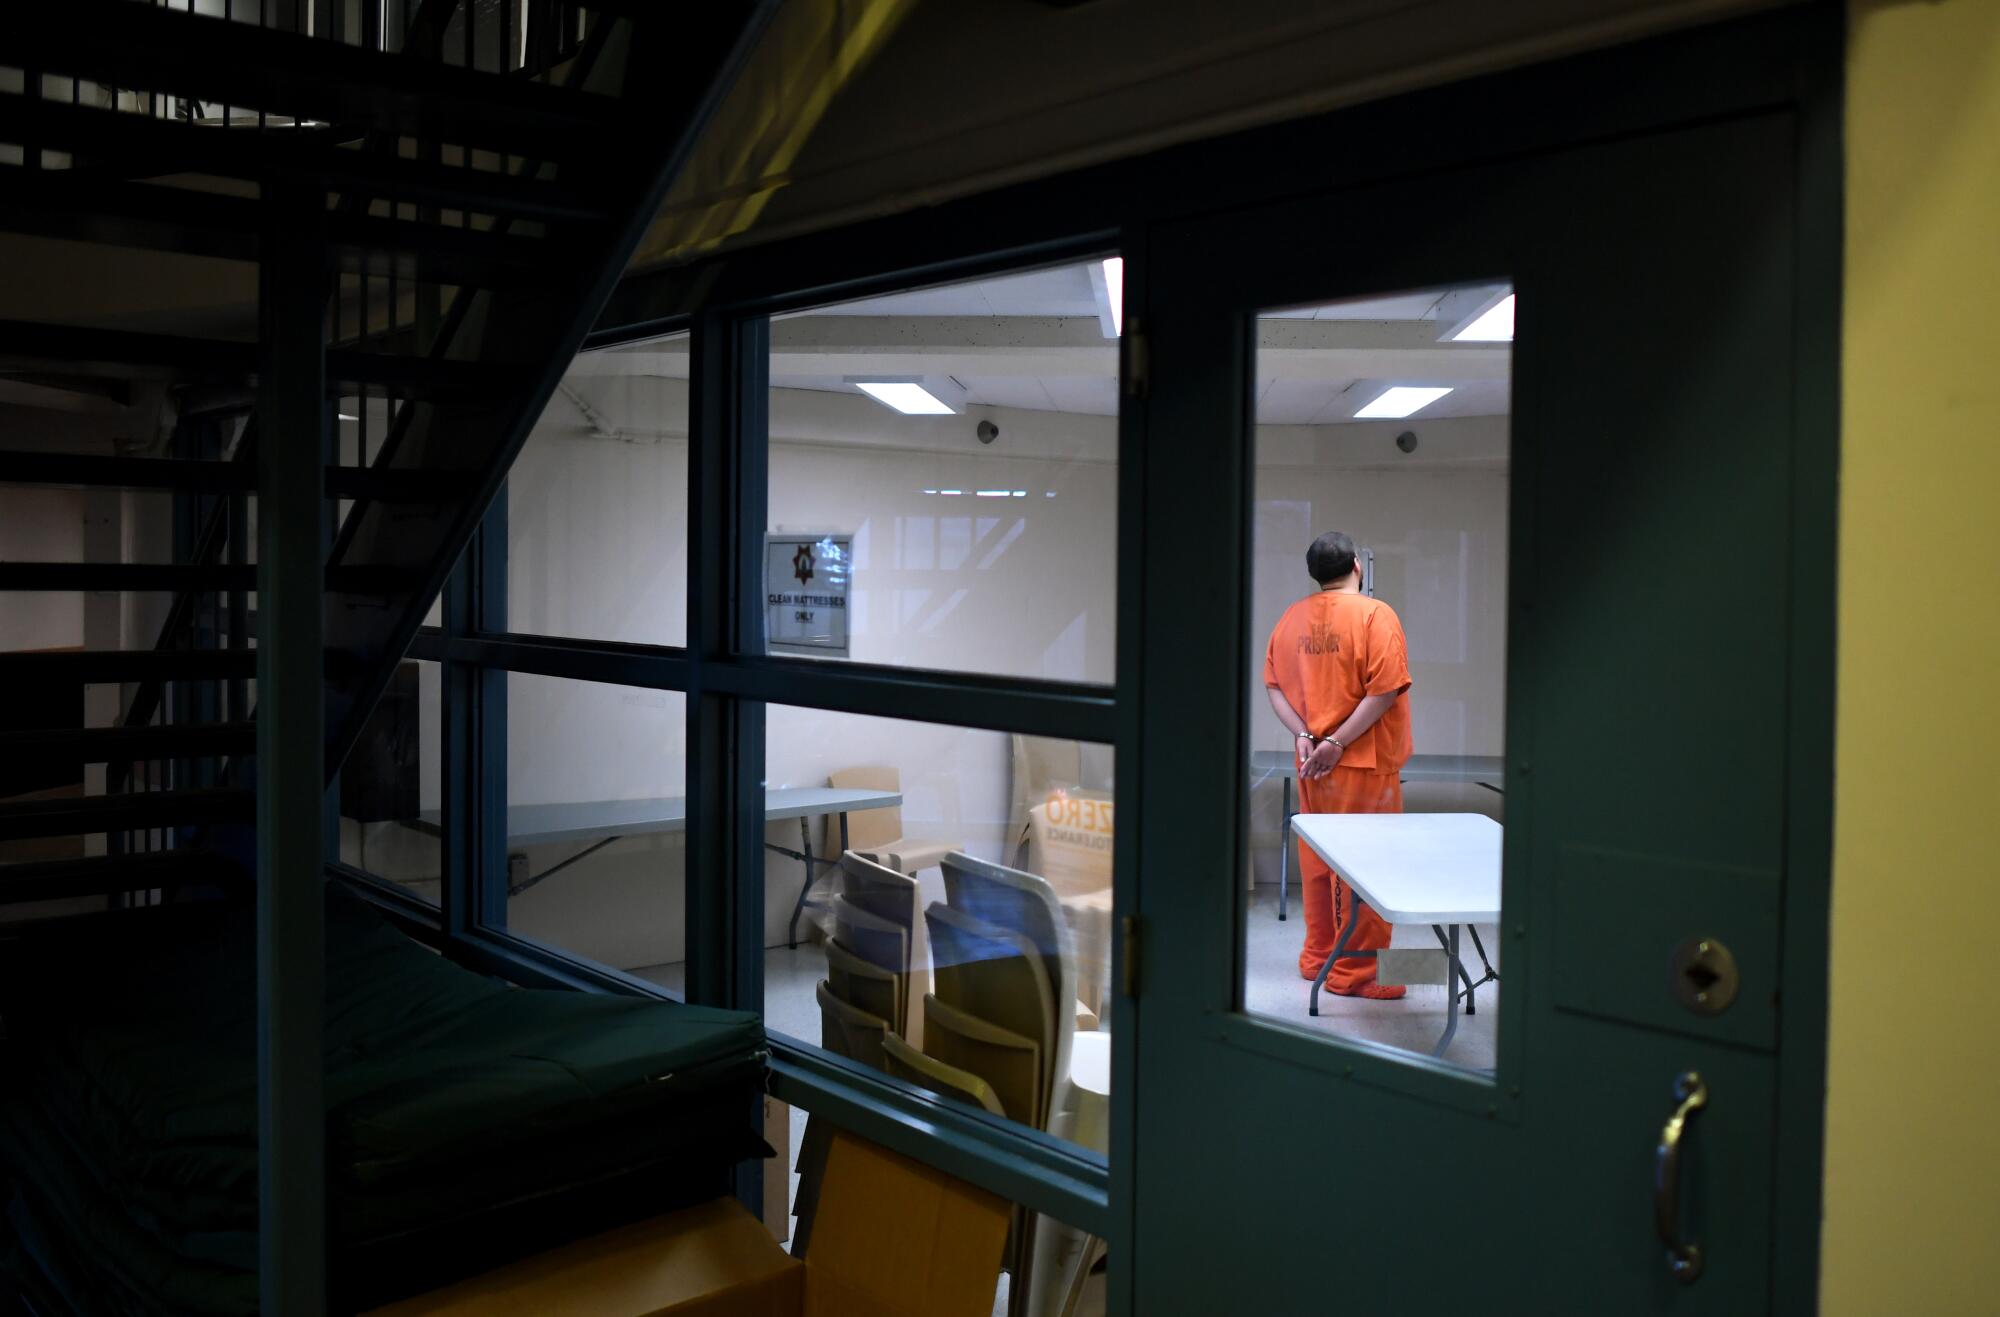 An inmate is handcuffed in a holding cell at the main jail in downtown Sacramento.